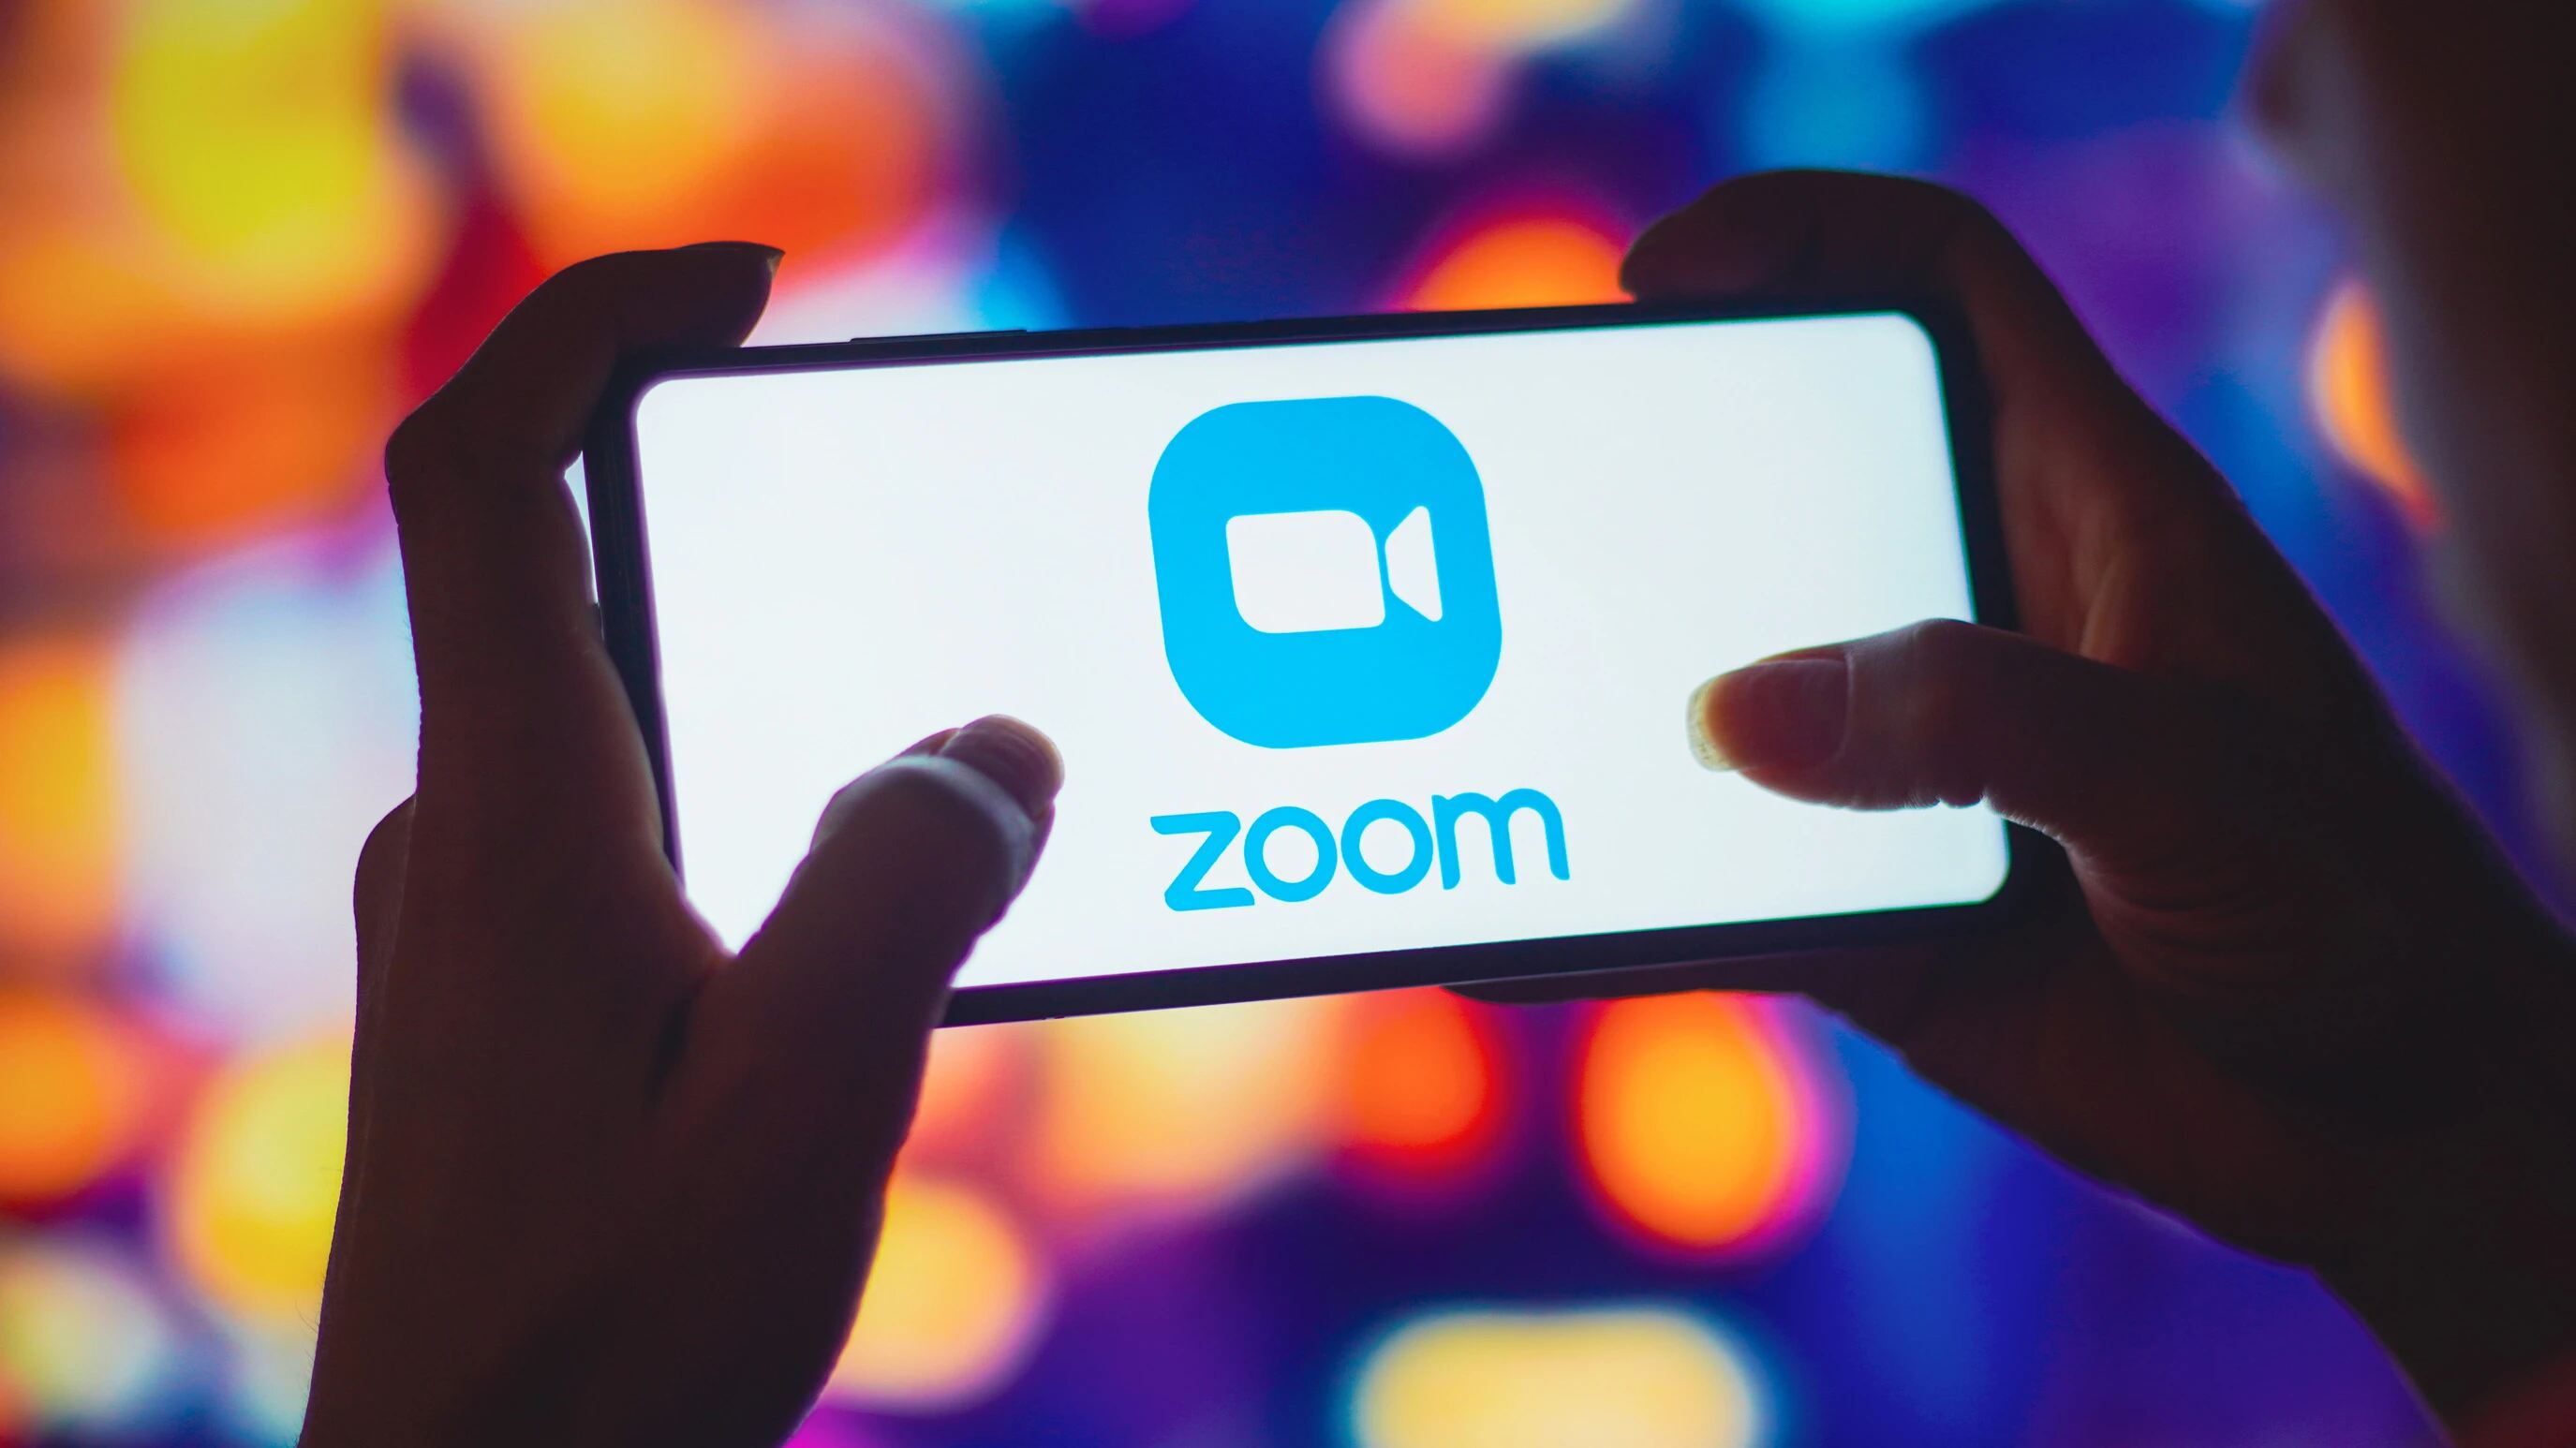 How To Open Zoom In Browser